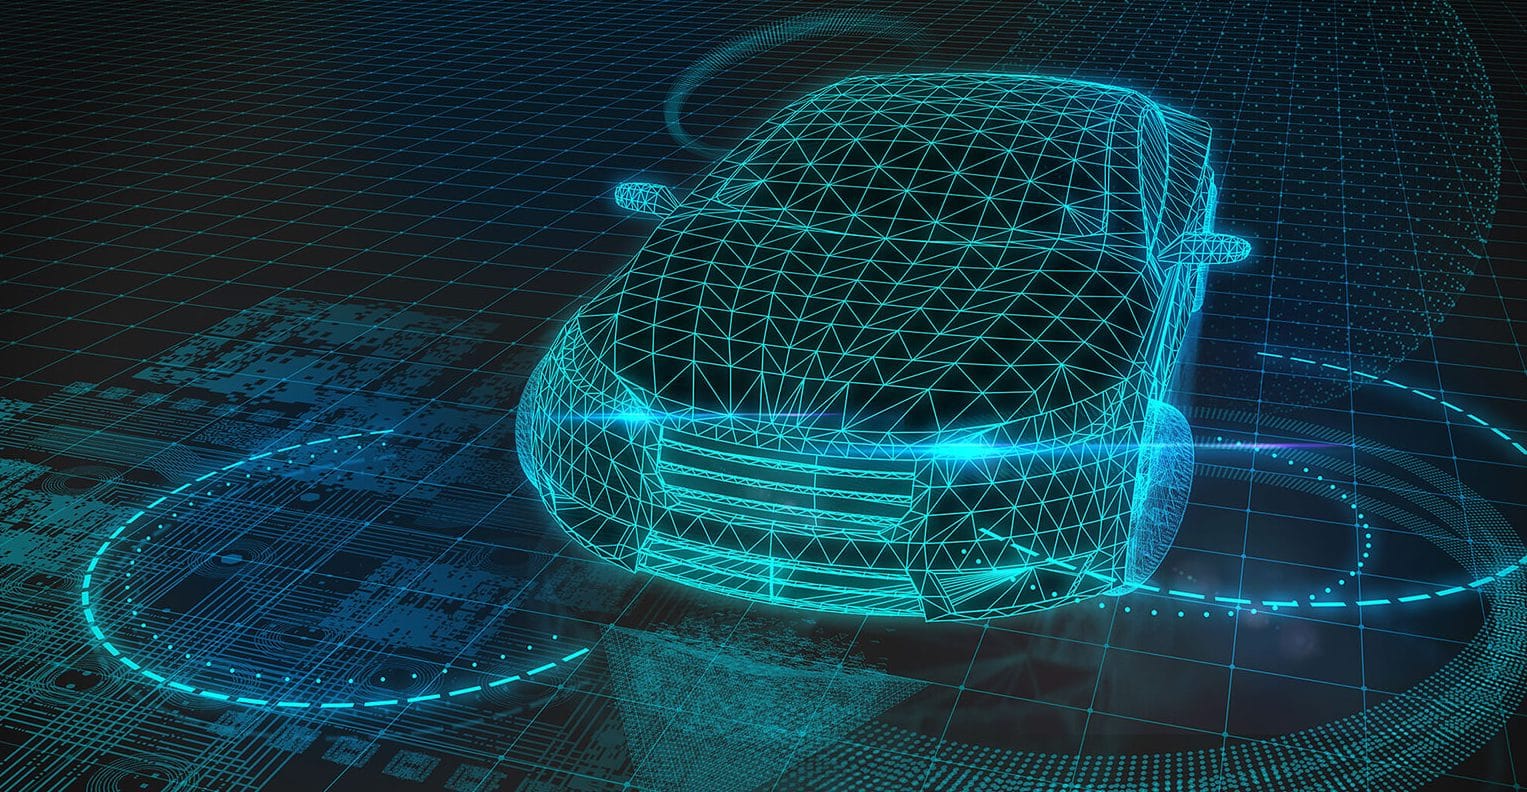 https://www.autosinnovate.org/innovation/Automotive%20Privacy/auto%20privacy-data%20and%20connected%20consumers.jpg